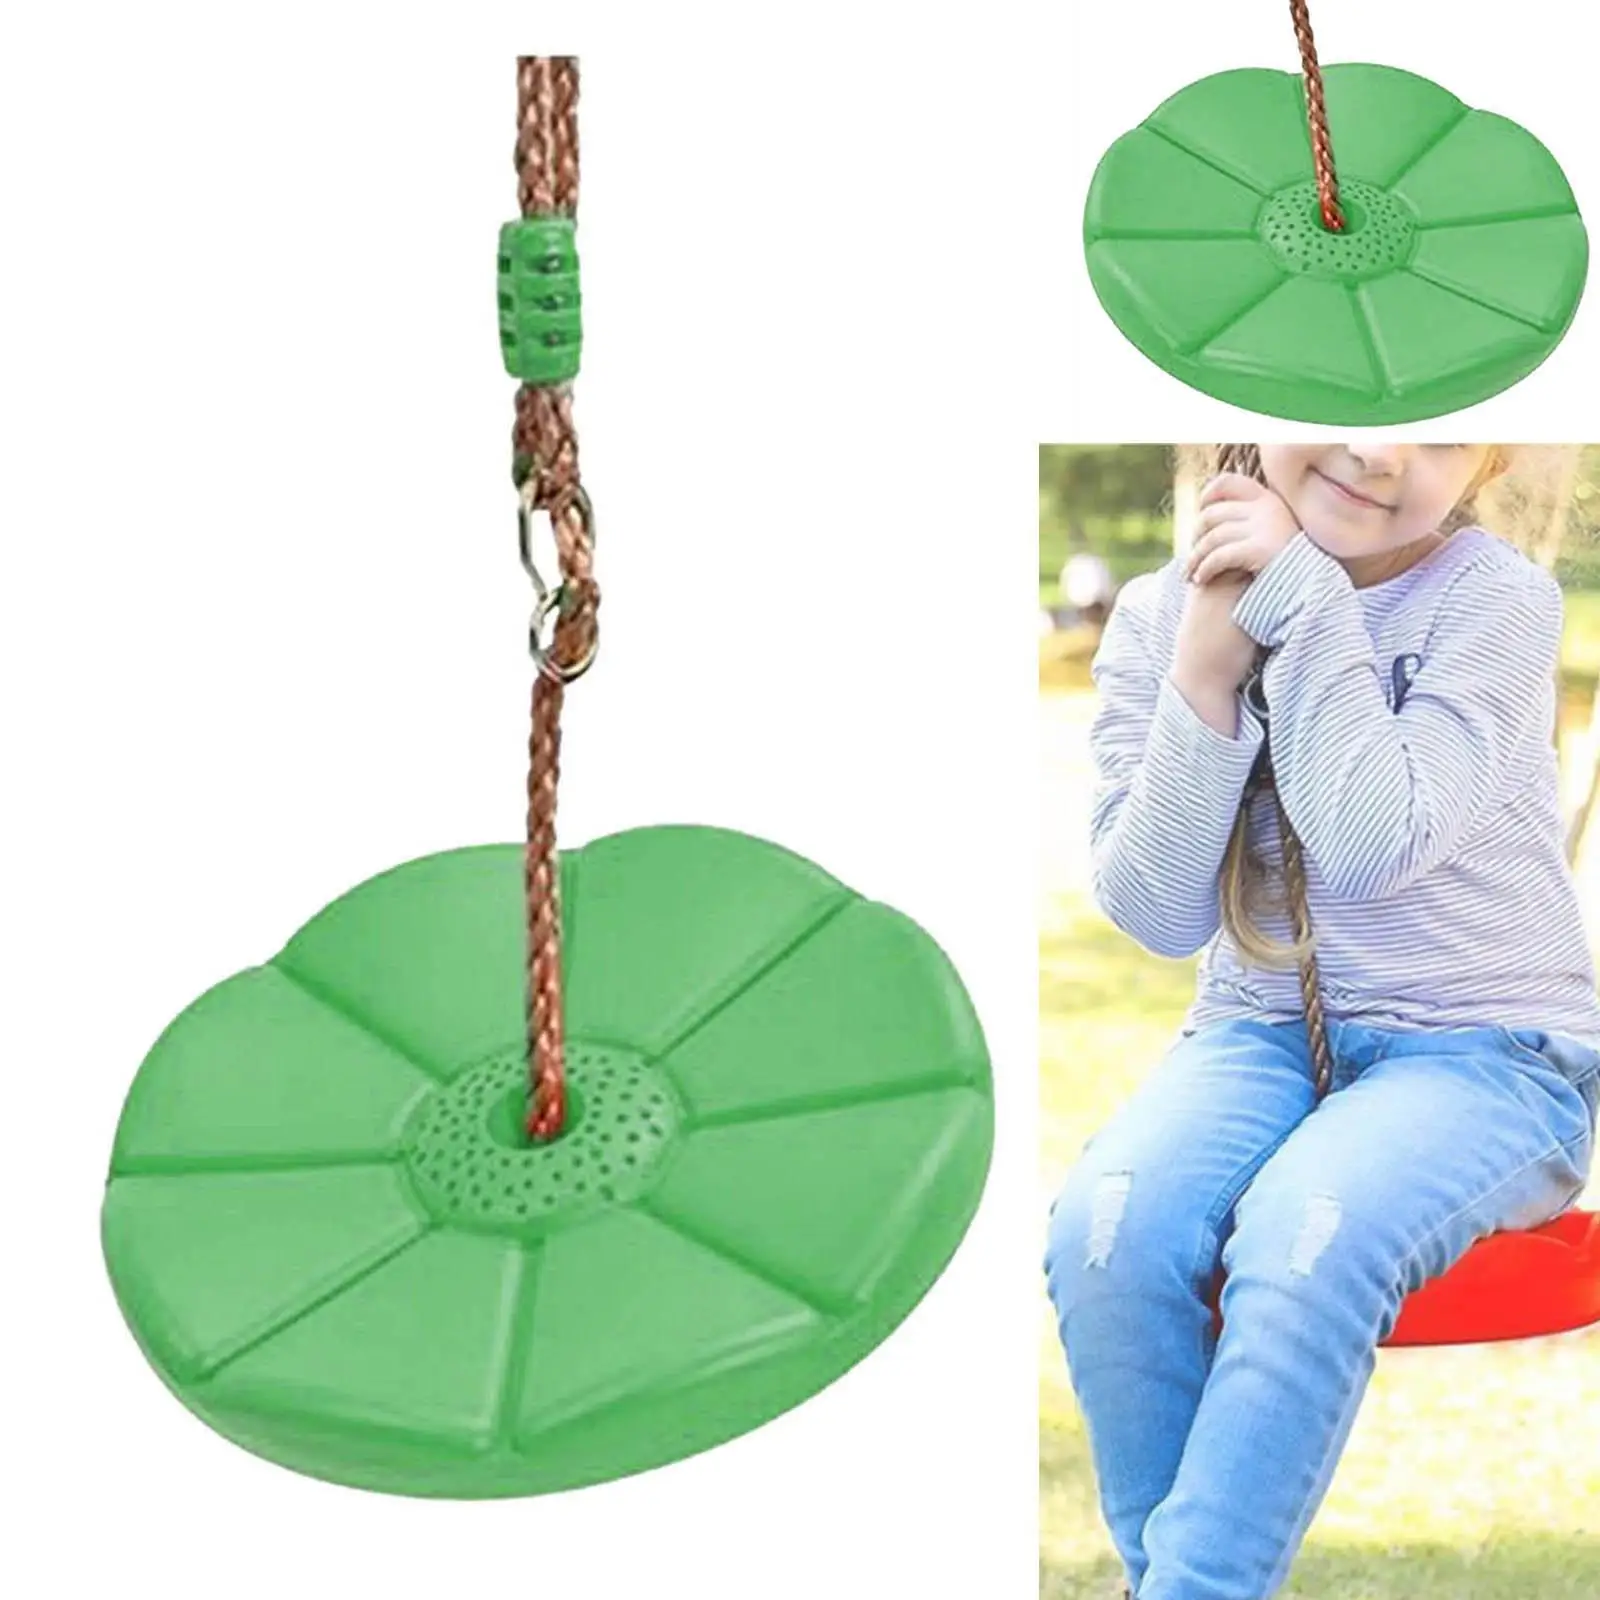  Disc Seat with Climbing Rope Outdoor Playground Set Accessories Tree House  Outside Toys for Boys 